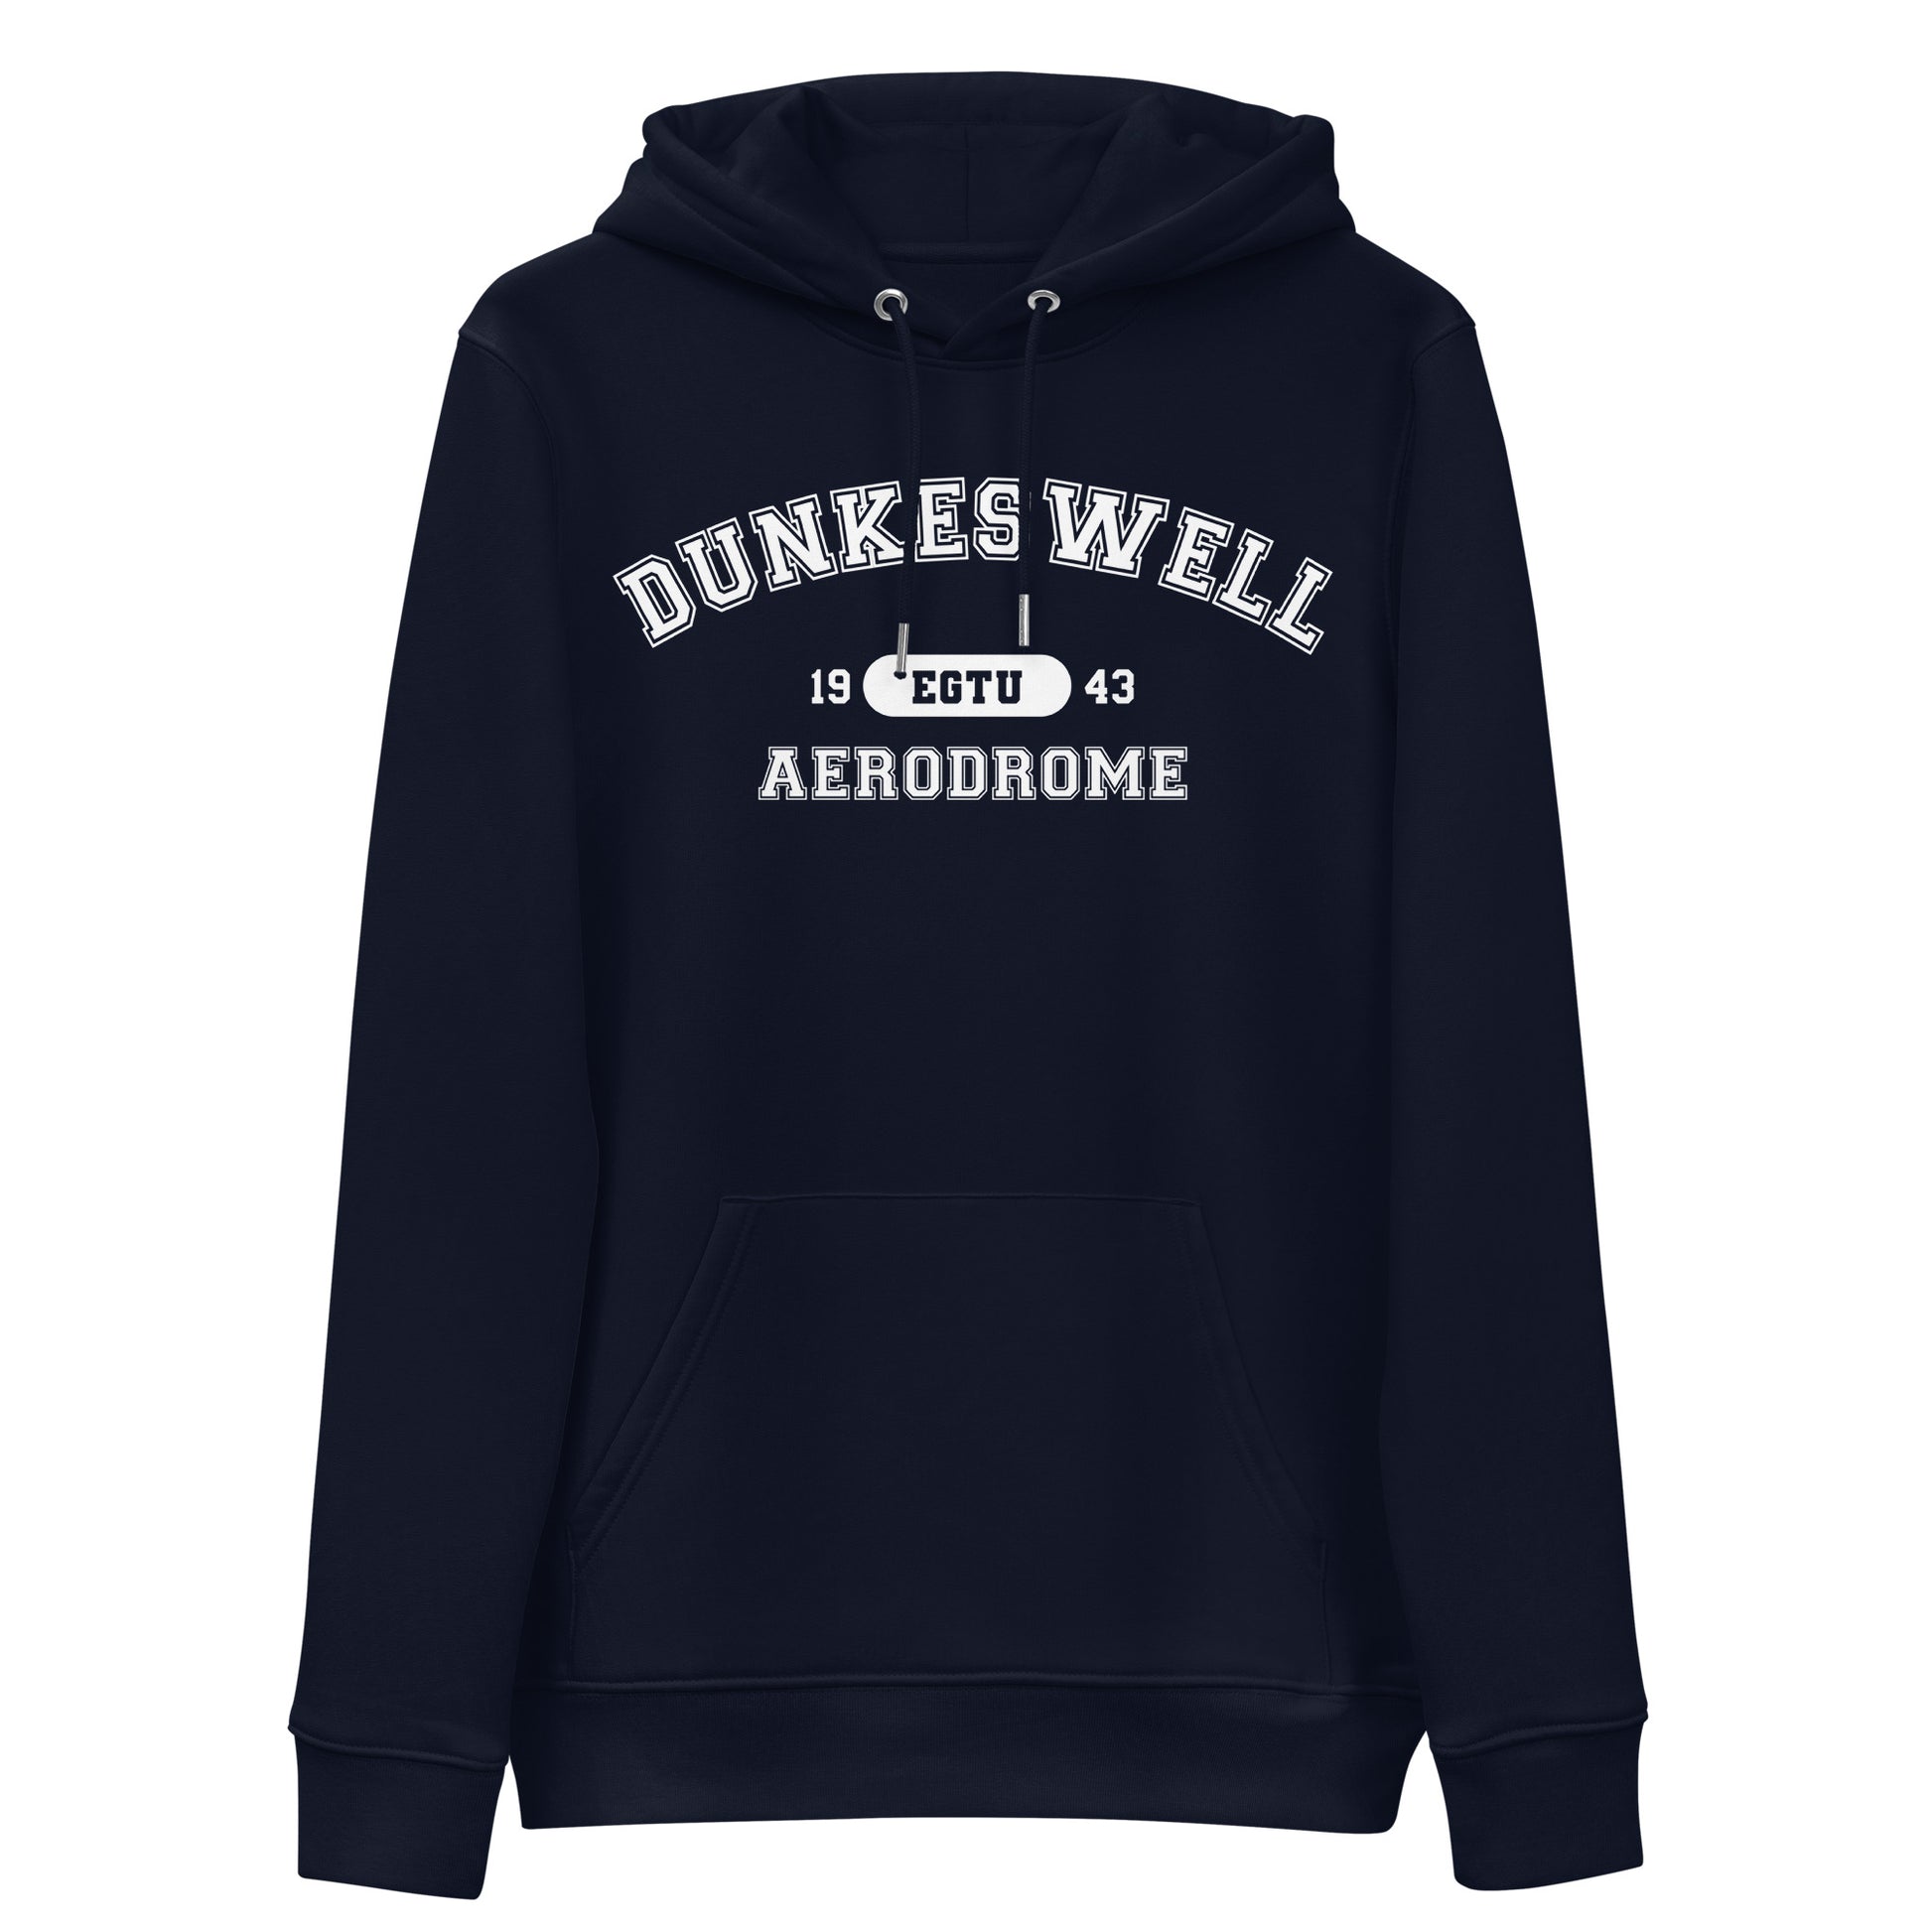 Navy blue Dunkeswell Aerodrome collegiate heavyweight hoodie features a classic collegiate style print with the airport's name, ICAO code and date of construction on the front.